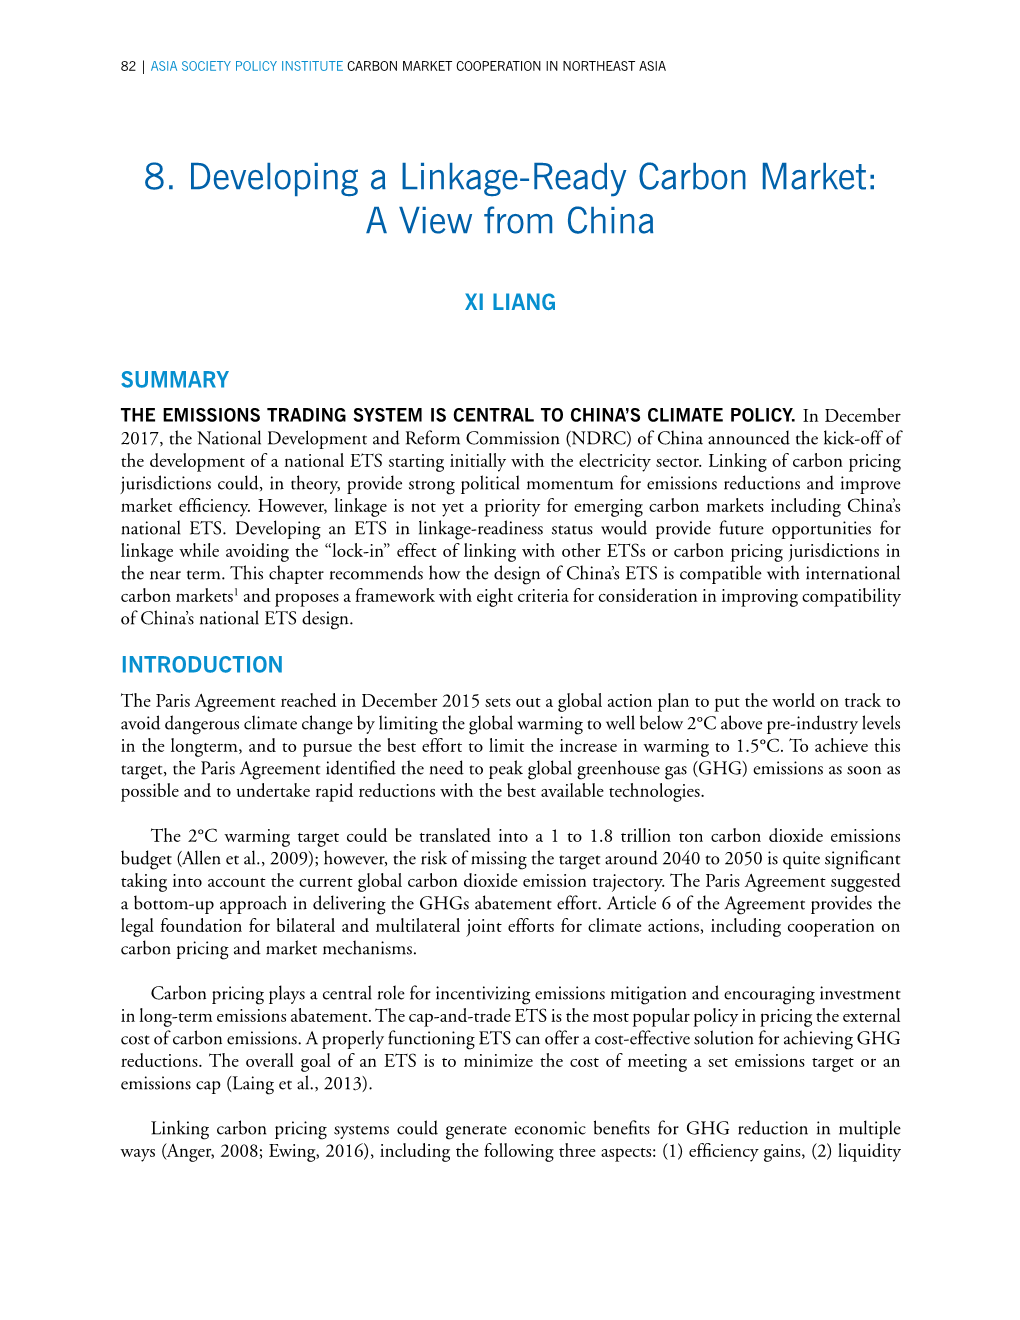 8. Developing a Linkage-Ready Carbon Market: a View from China